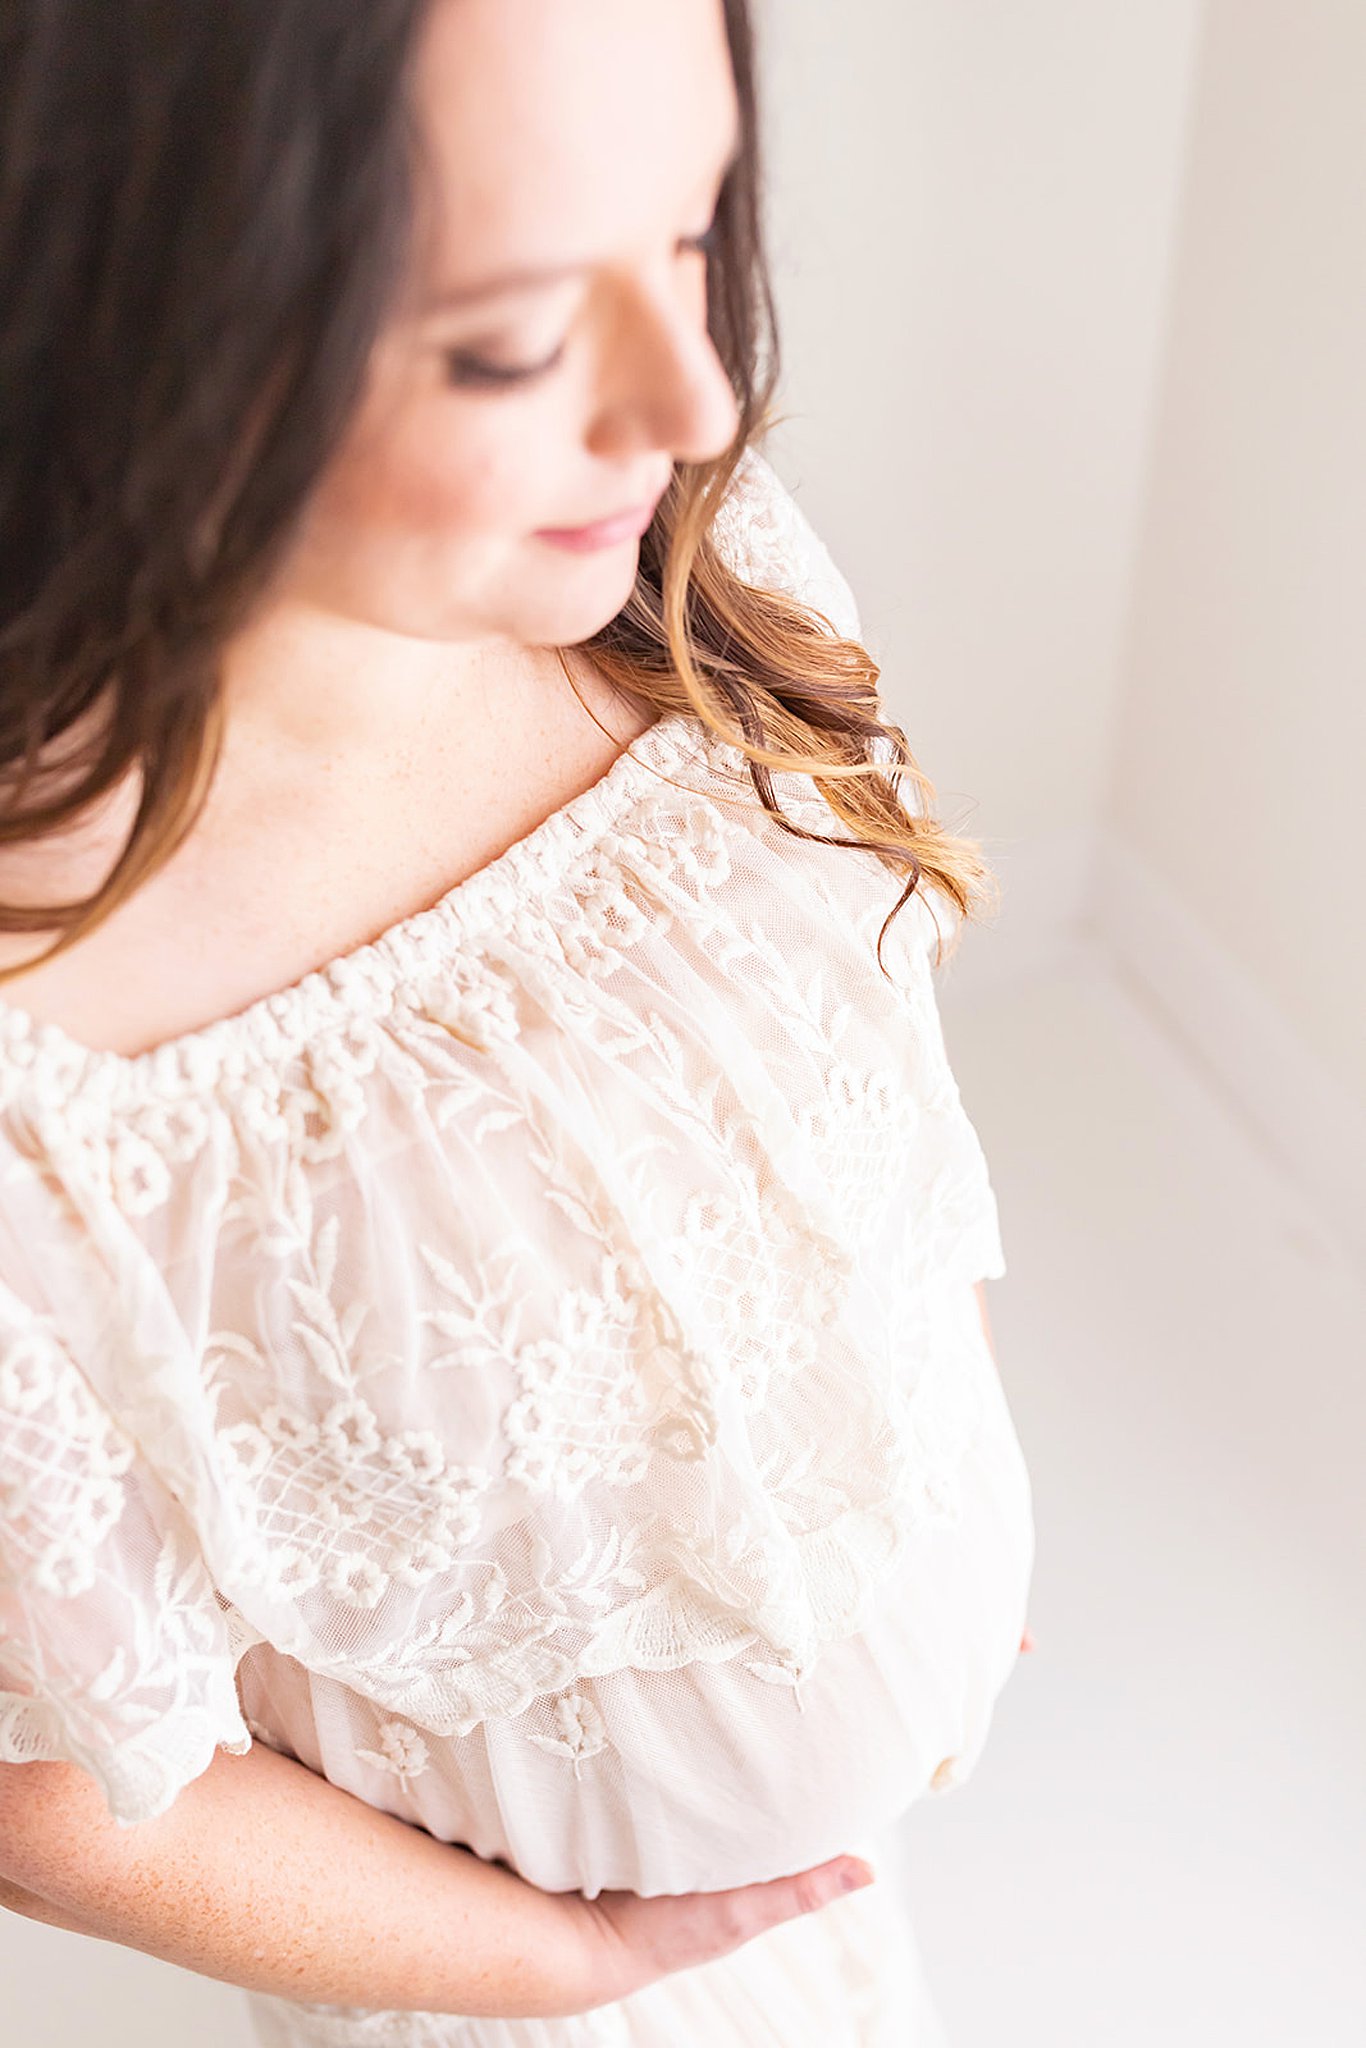 Mother to be wearing white maternity gown holds bottom of her bump pittsburgh doulas